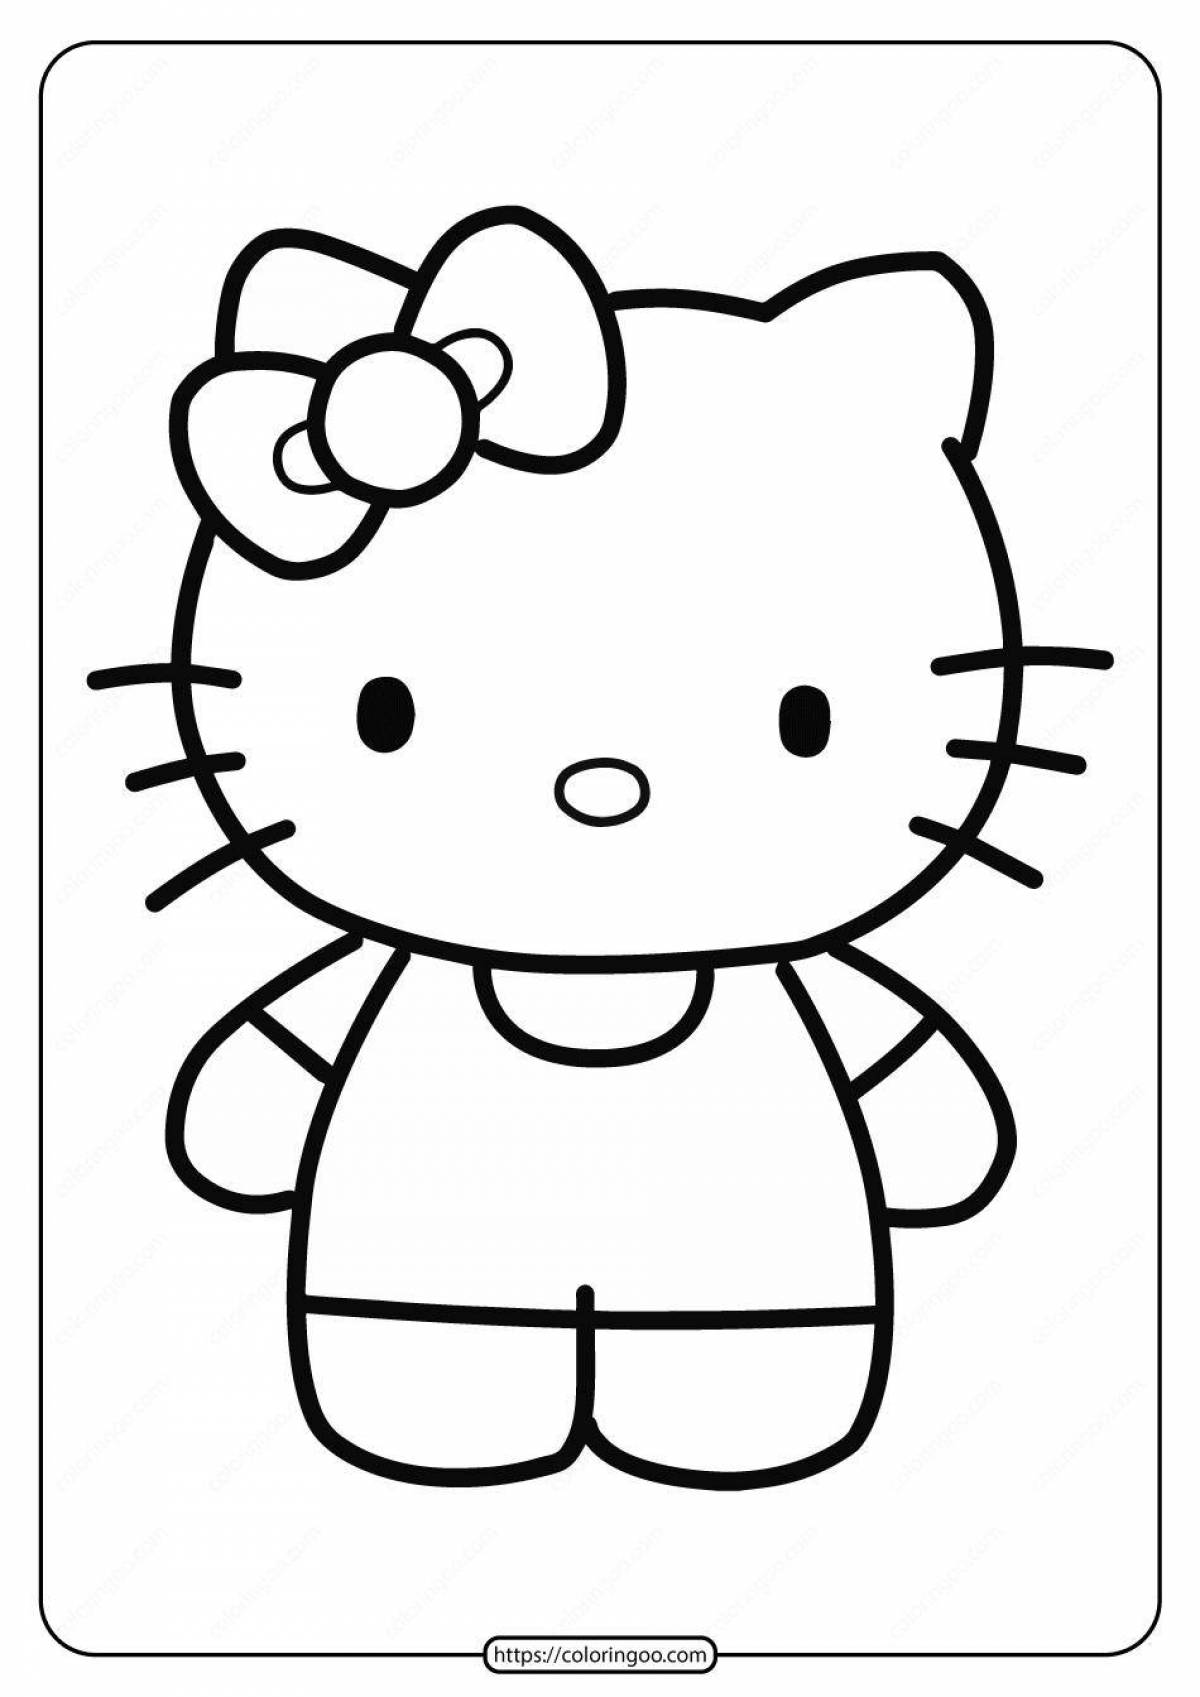 Exquisite hello kitty head coloring book